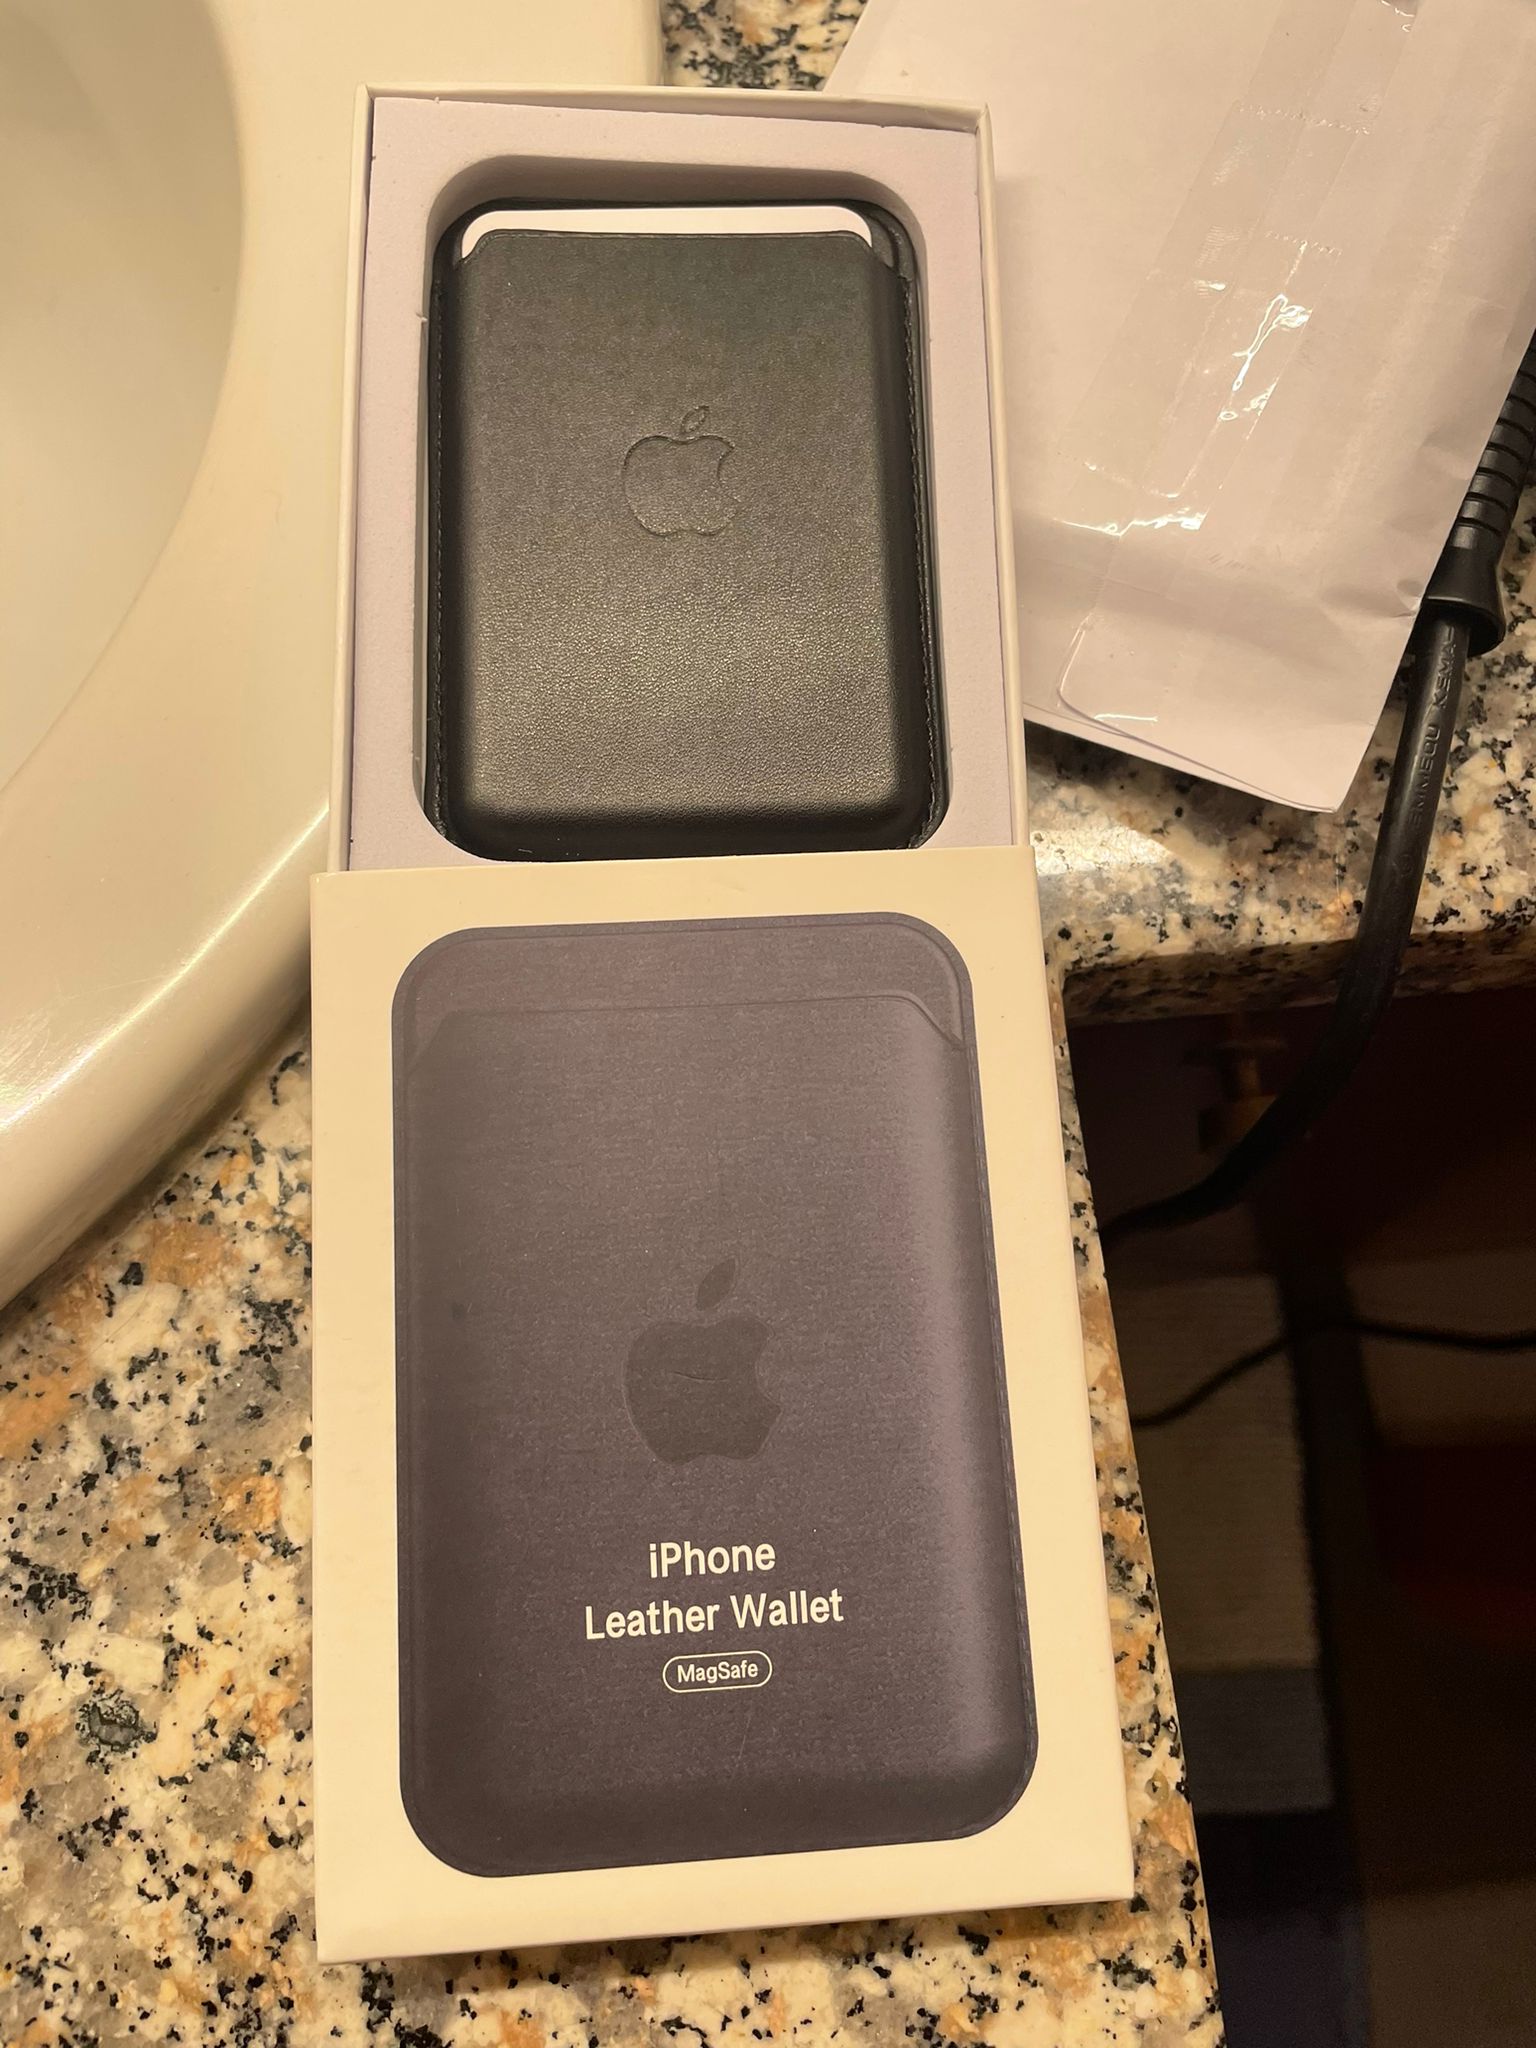 Apple Wallet Magsafe real or fake? - Apple Community